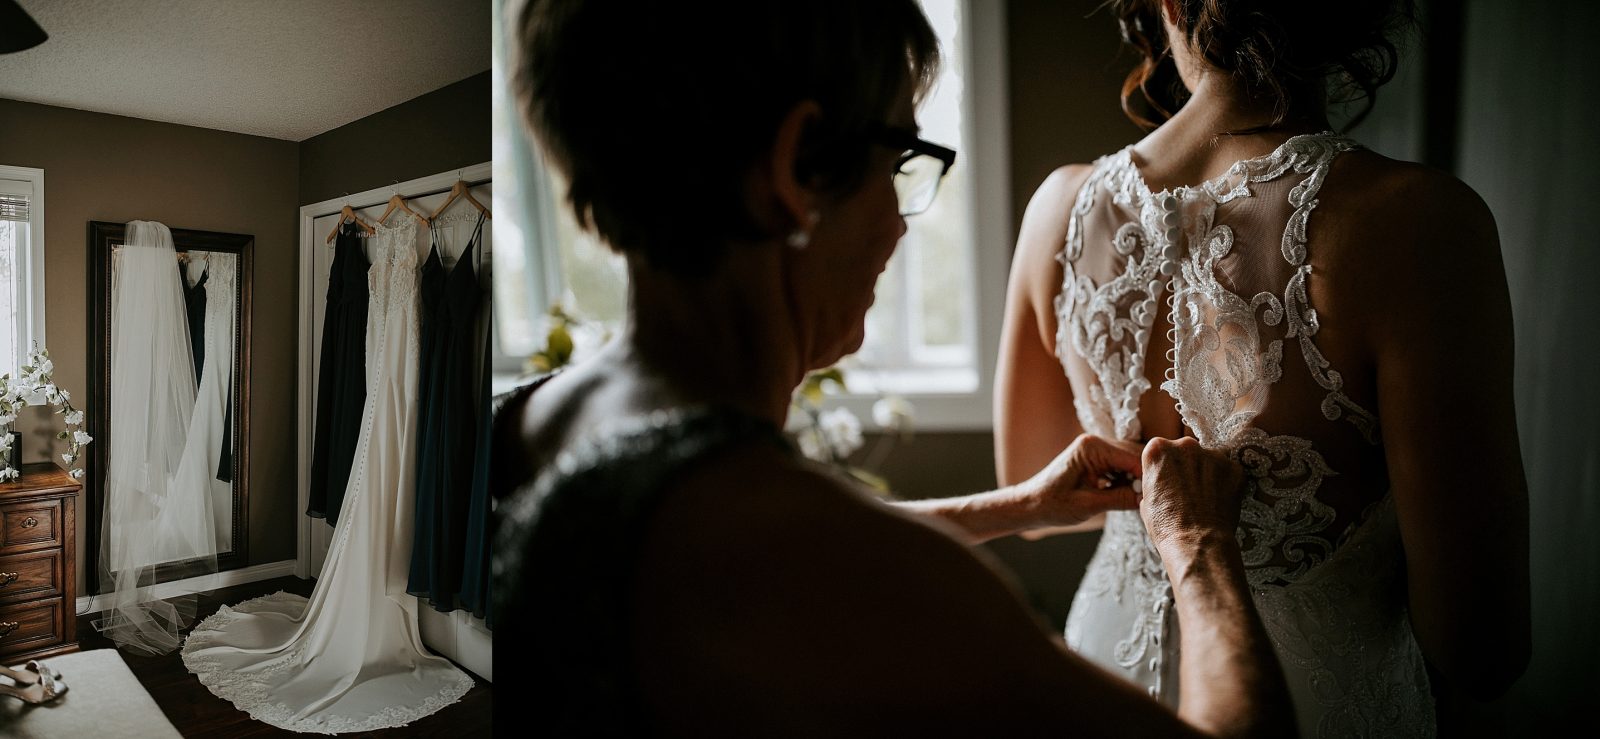 bride getting ready with her mom on her wedding day